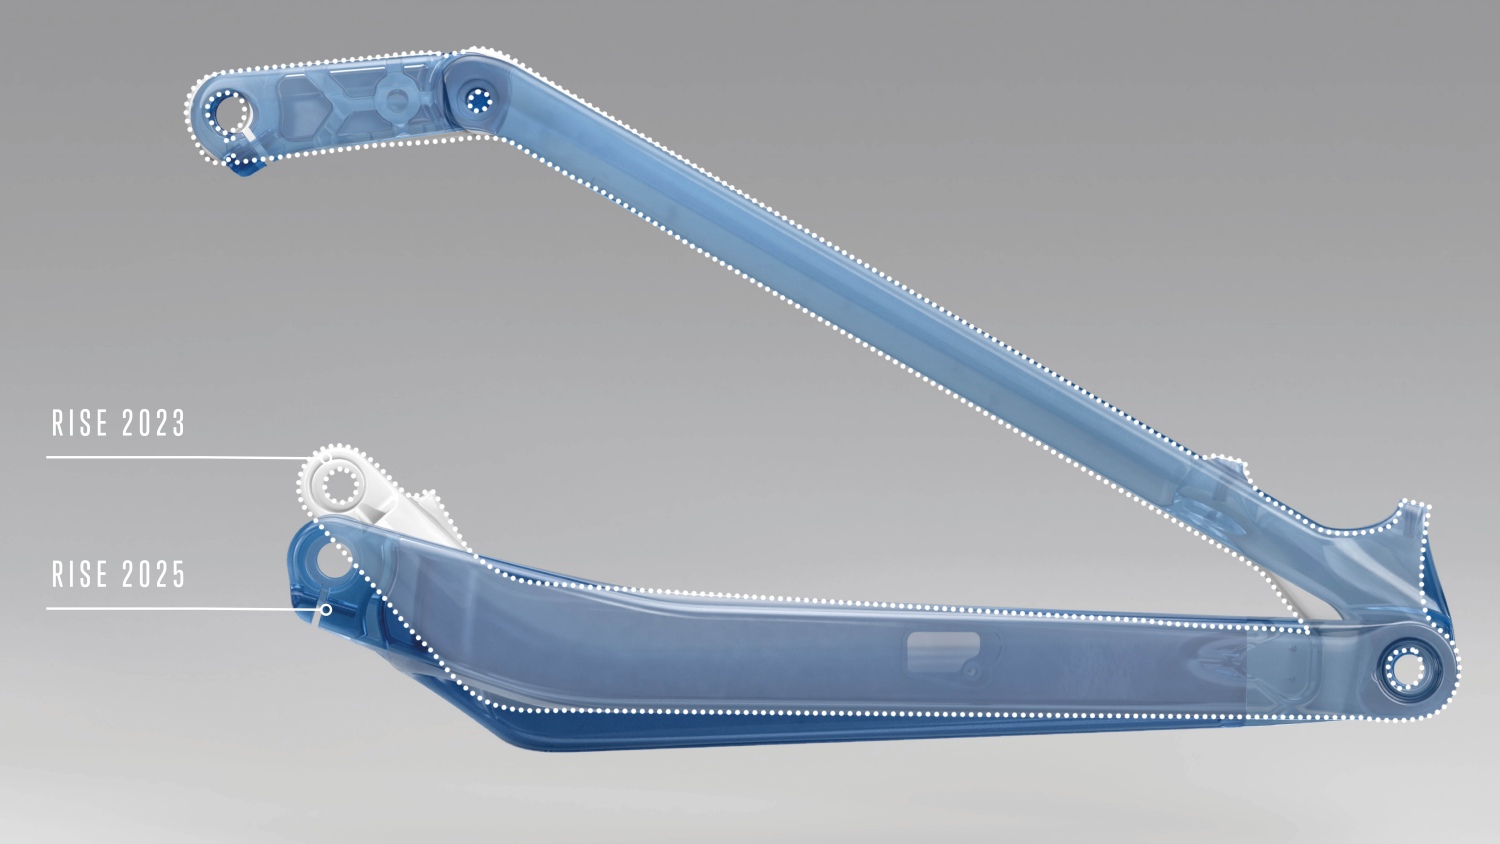 We expect the redesigned rear triangle is nice and robust.